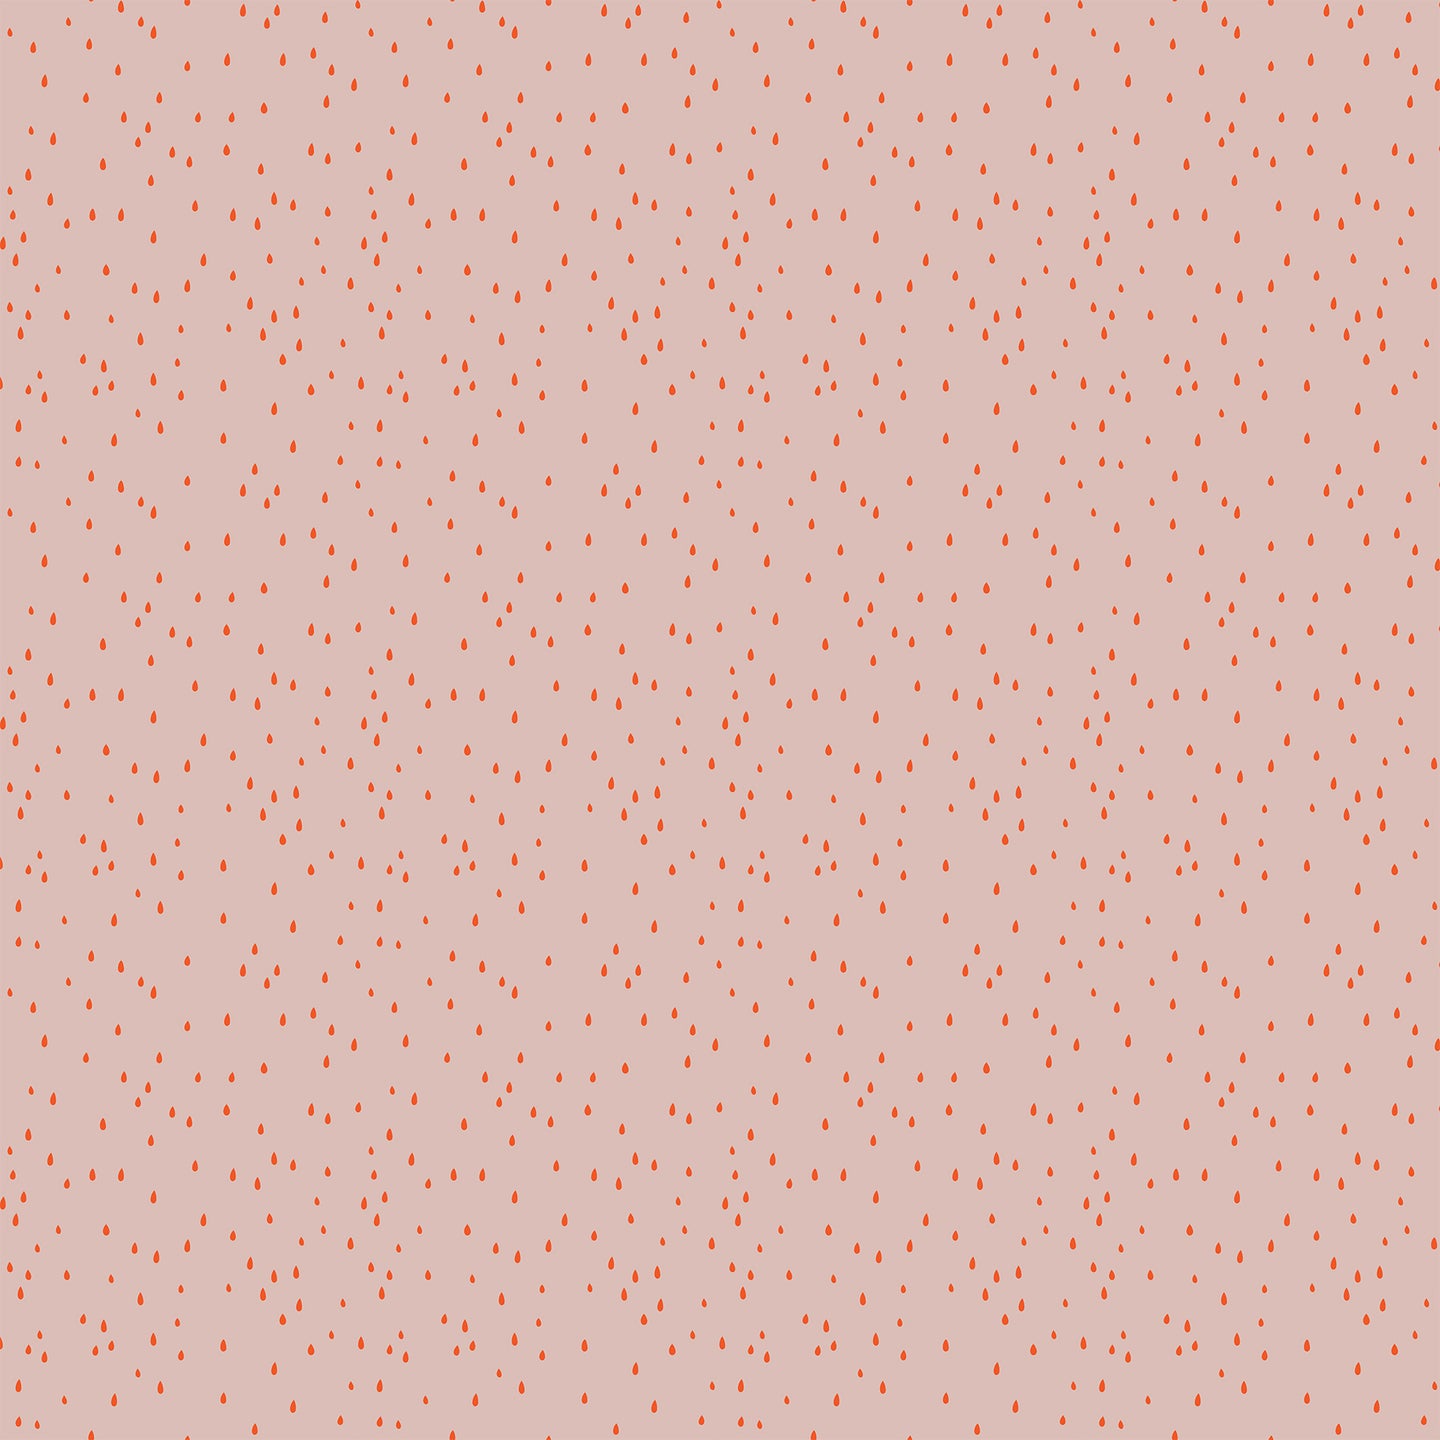 Ghost Town by Dana Willard for Figo Fabrics orange watermelon seed or teardrop shaped polka dots light creamsicle orange background great for Halloween trick or treat bags quilts table runners garments and sewing projects material high quality cotton